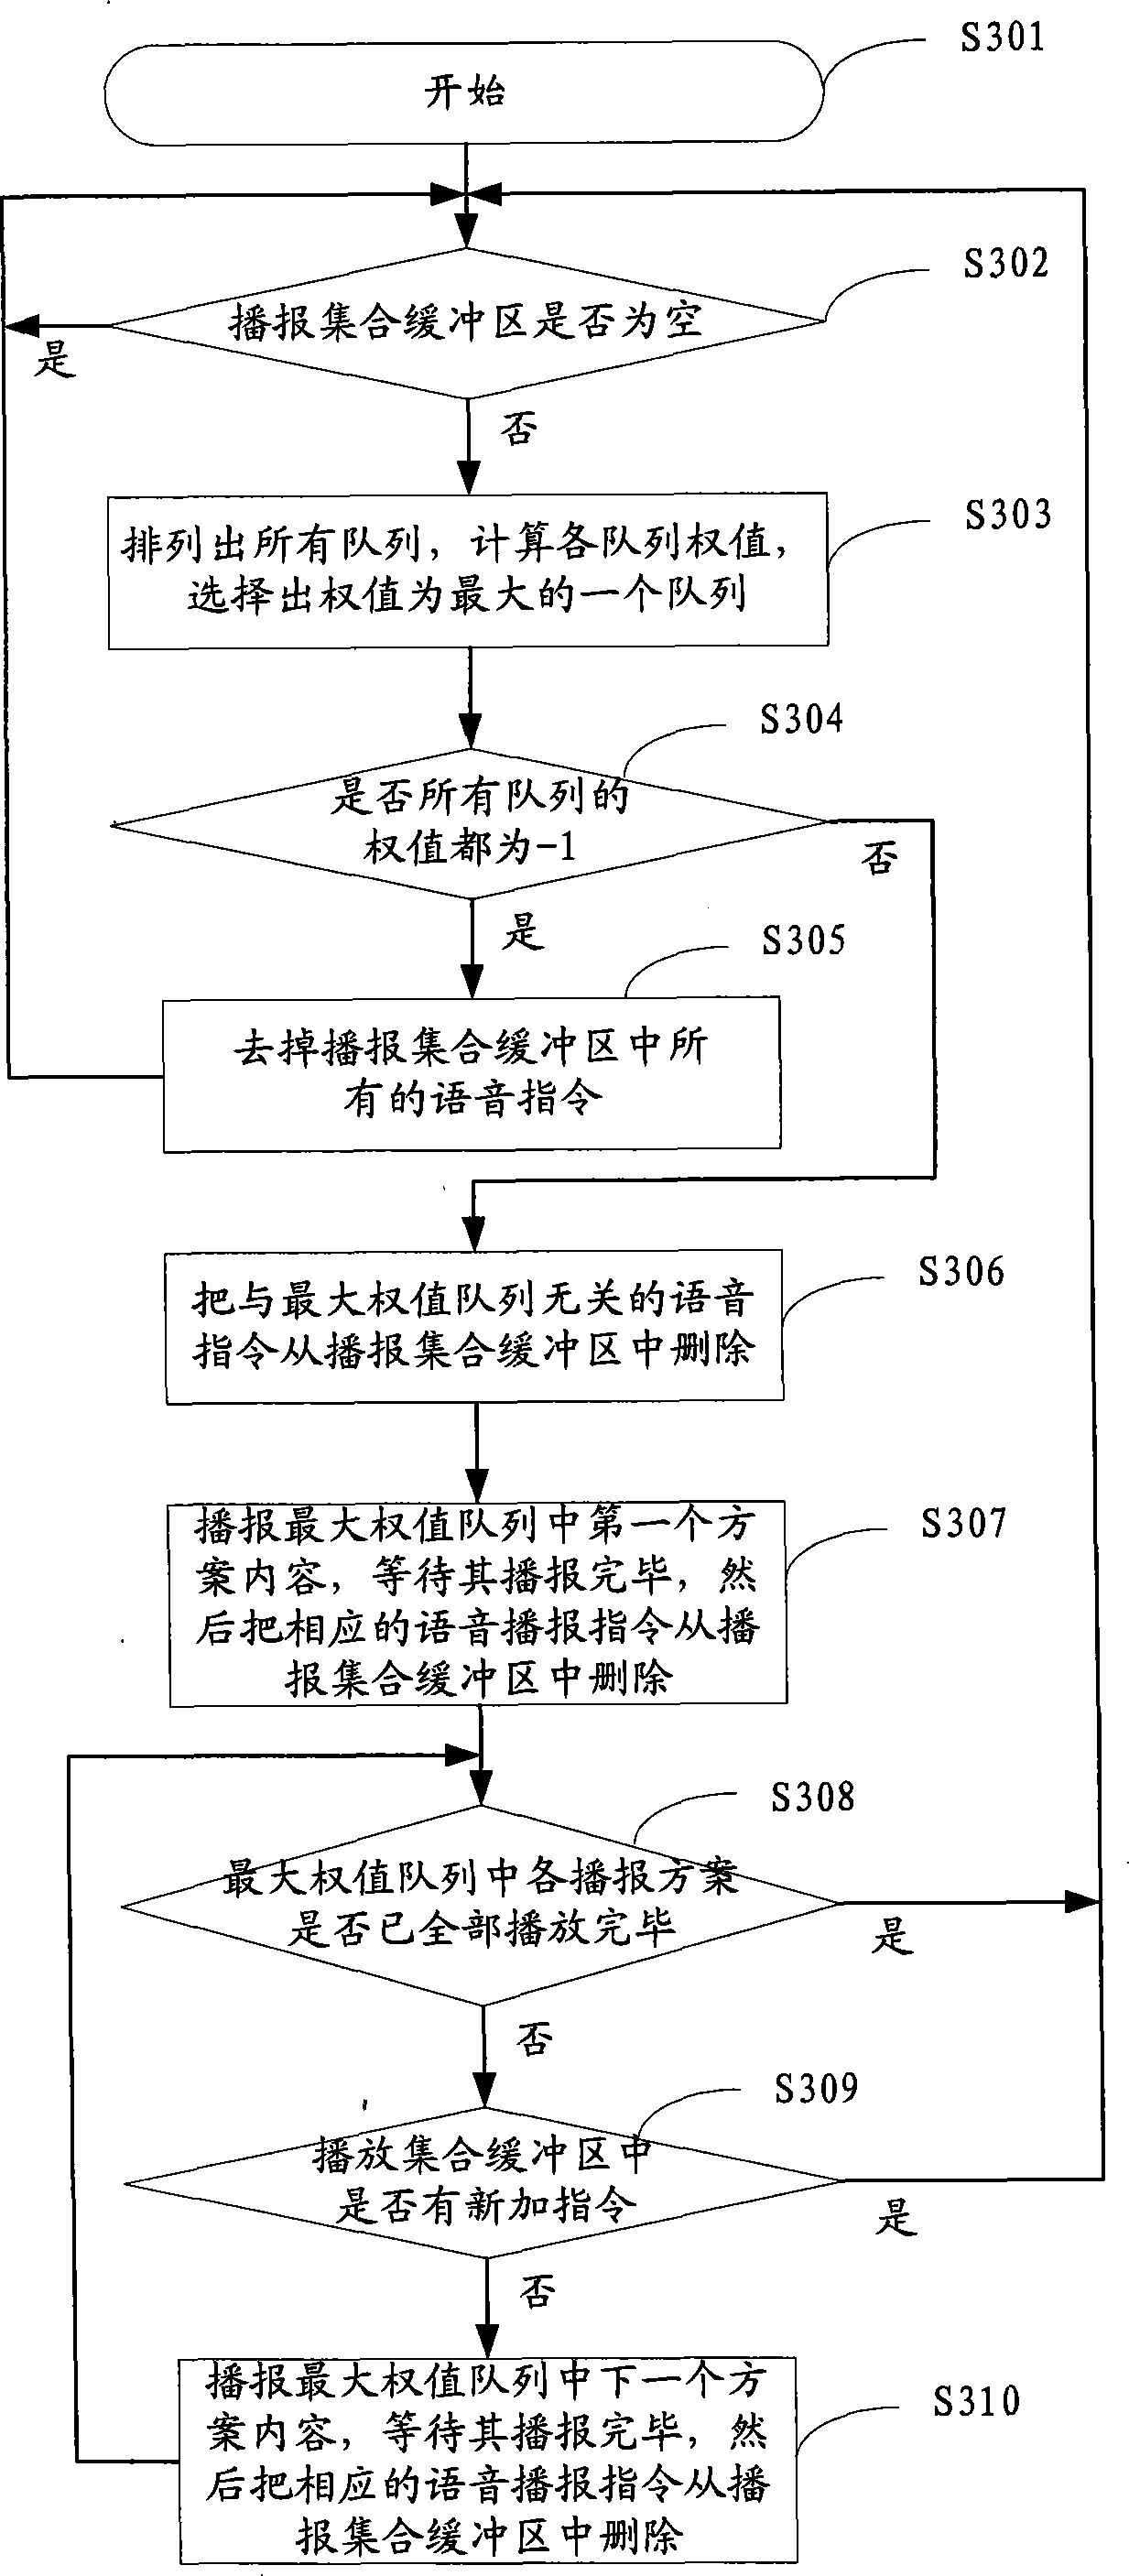 Voice broadcasting device and navigation system using the same and its method